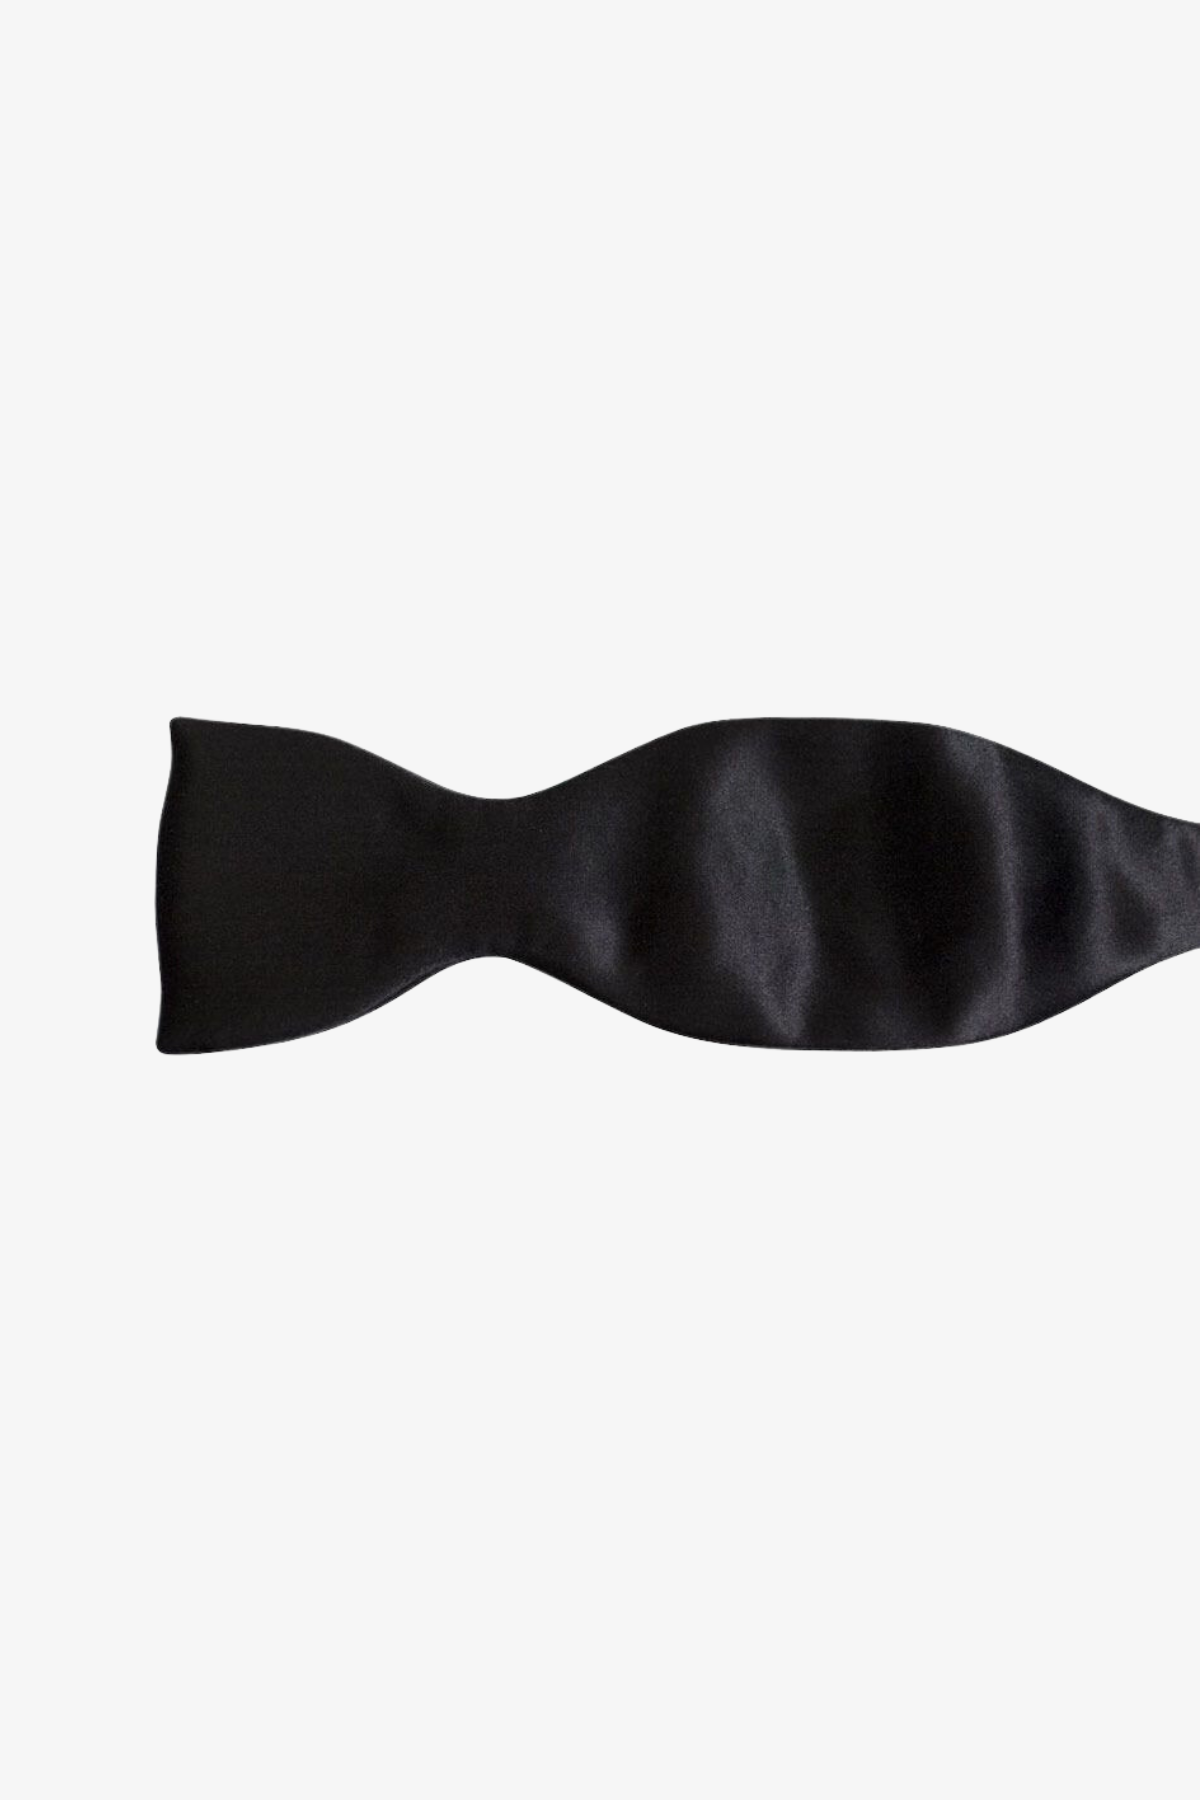 Tie your own Bow Tie - Assorted Colours